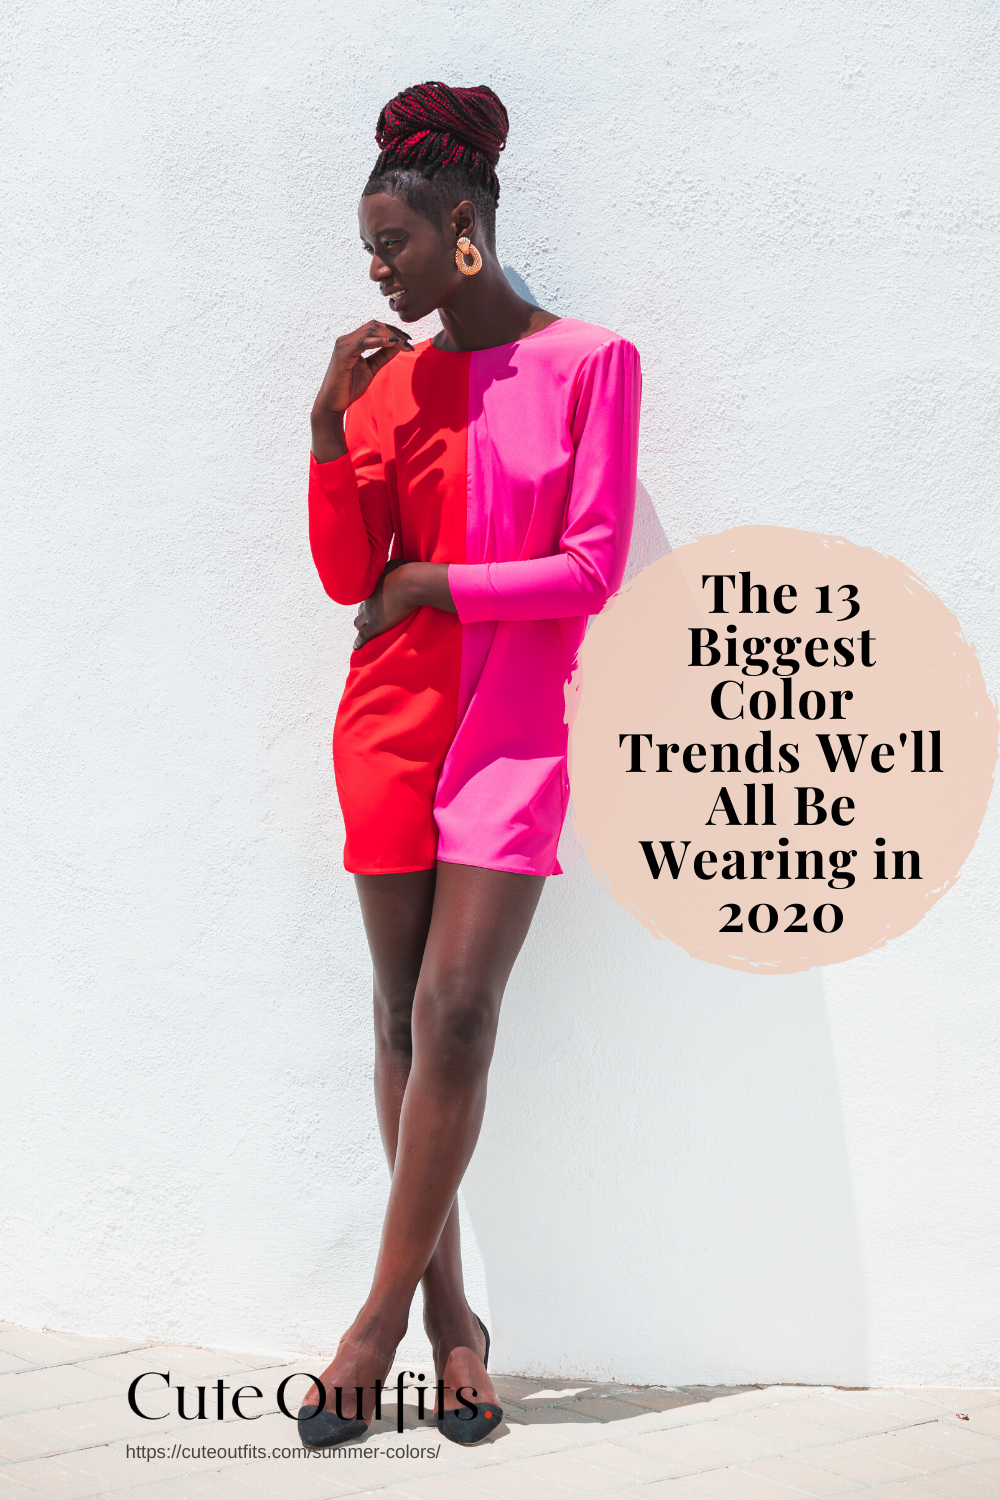 placard | The 13 Biggest Color Trends We'll All Be Wearing In 2020 [With Pics]